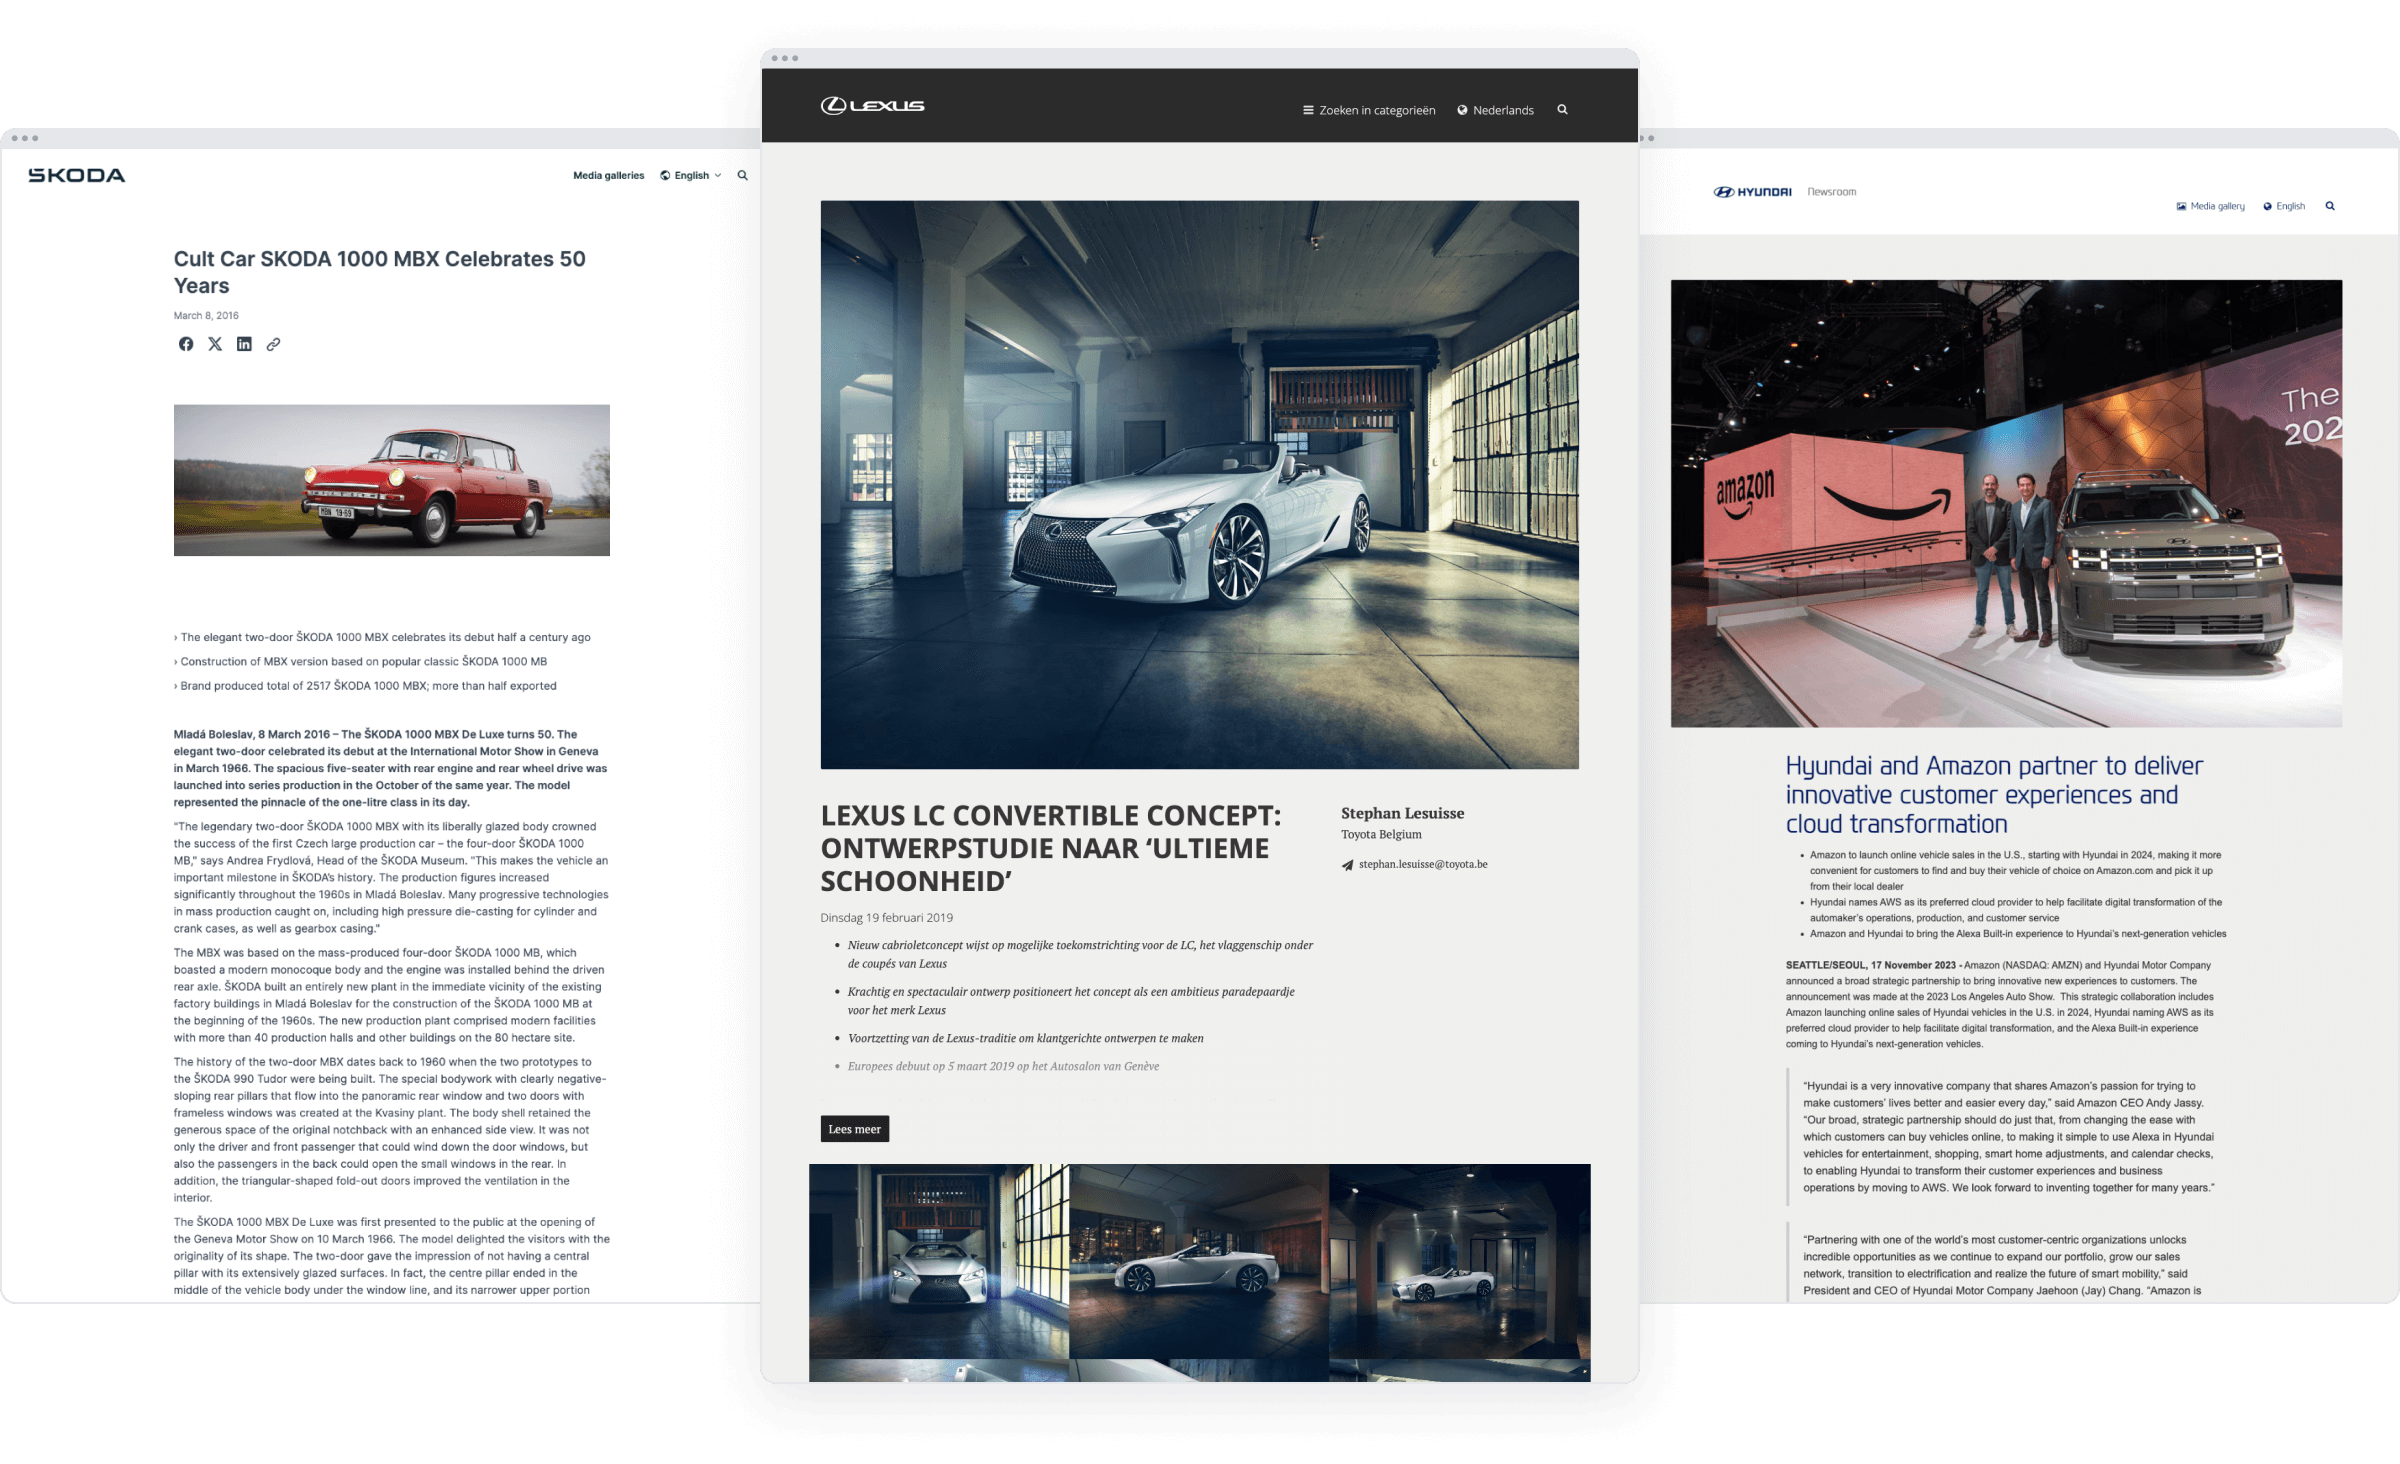 Automotive Press Release Examples to get your Motor Running